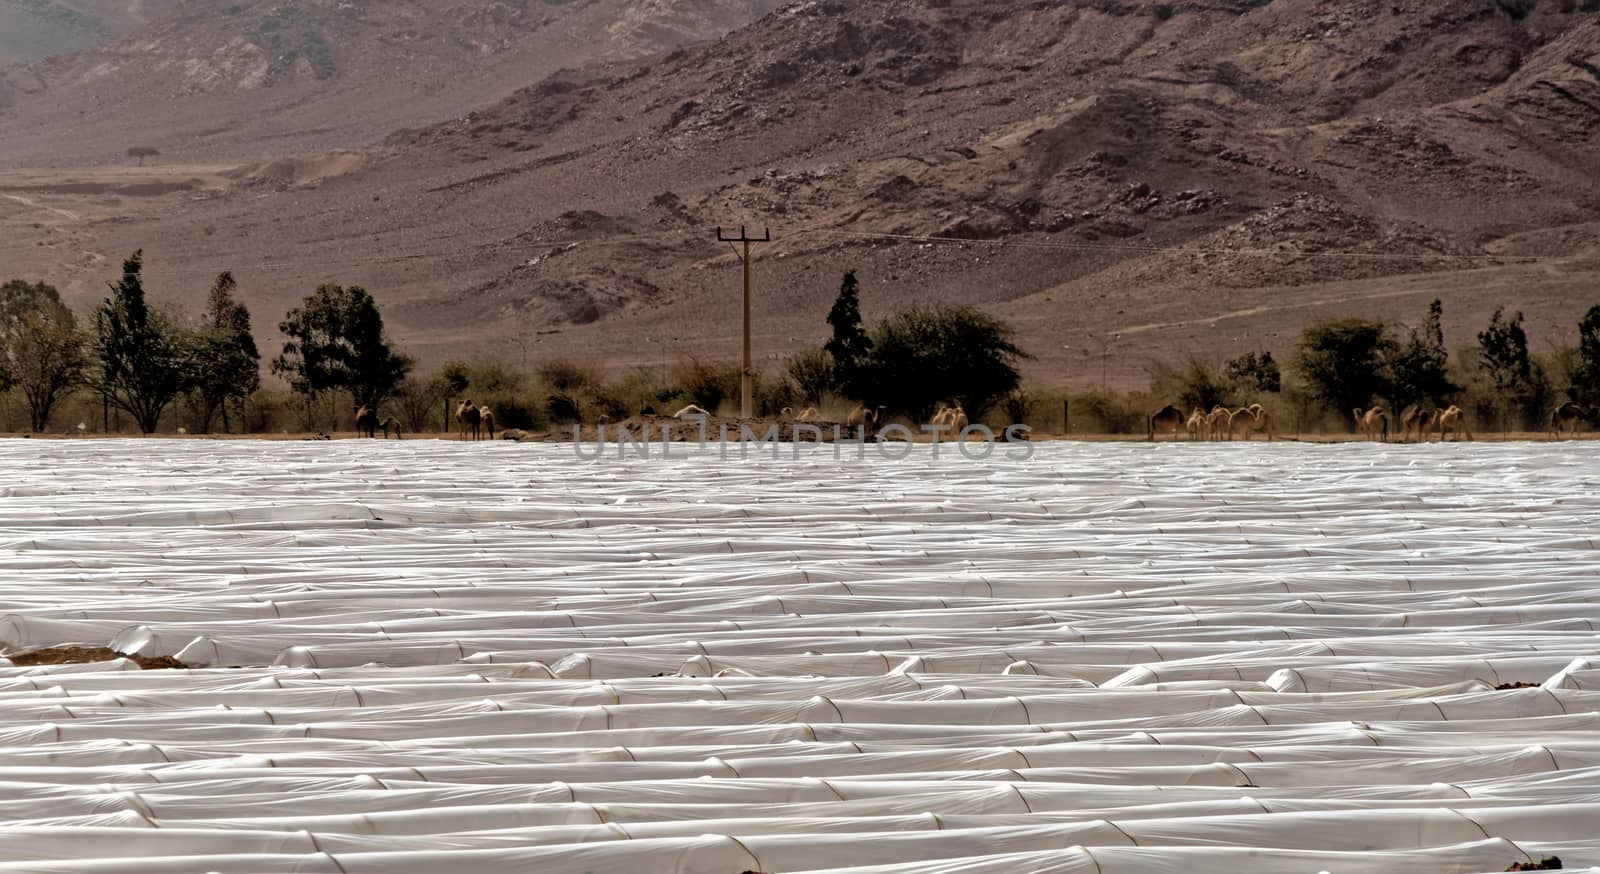 Tomatoes and aubergines grown under foil tunnels in the Jordan Desert by geogif